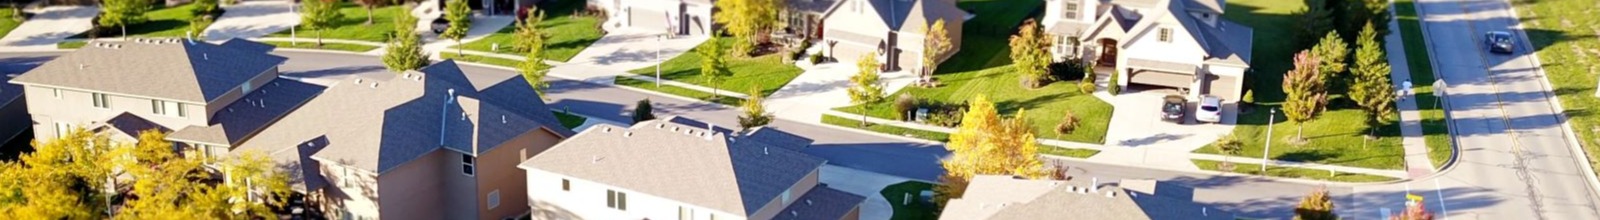 Subdivision houses graphic